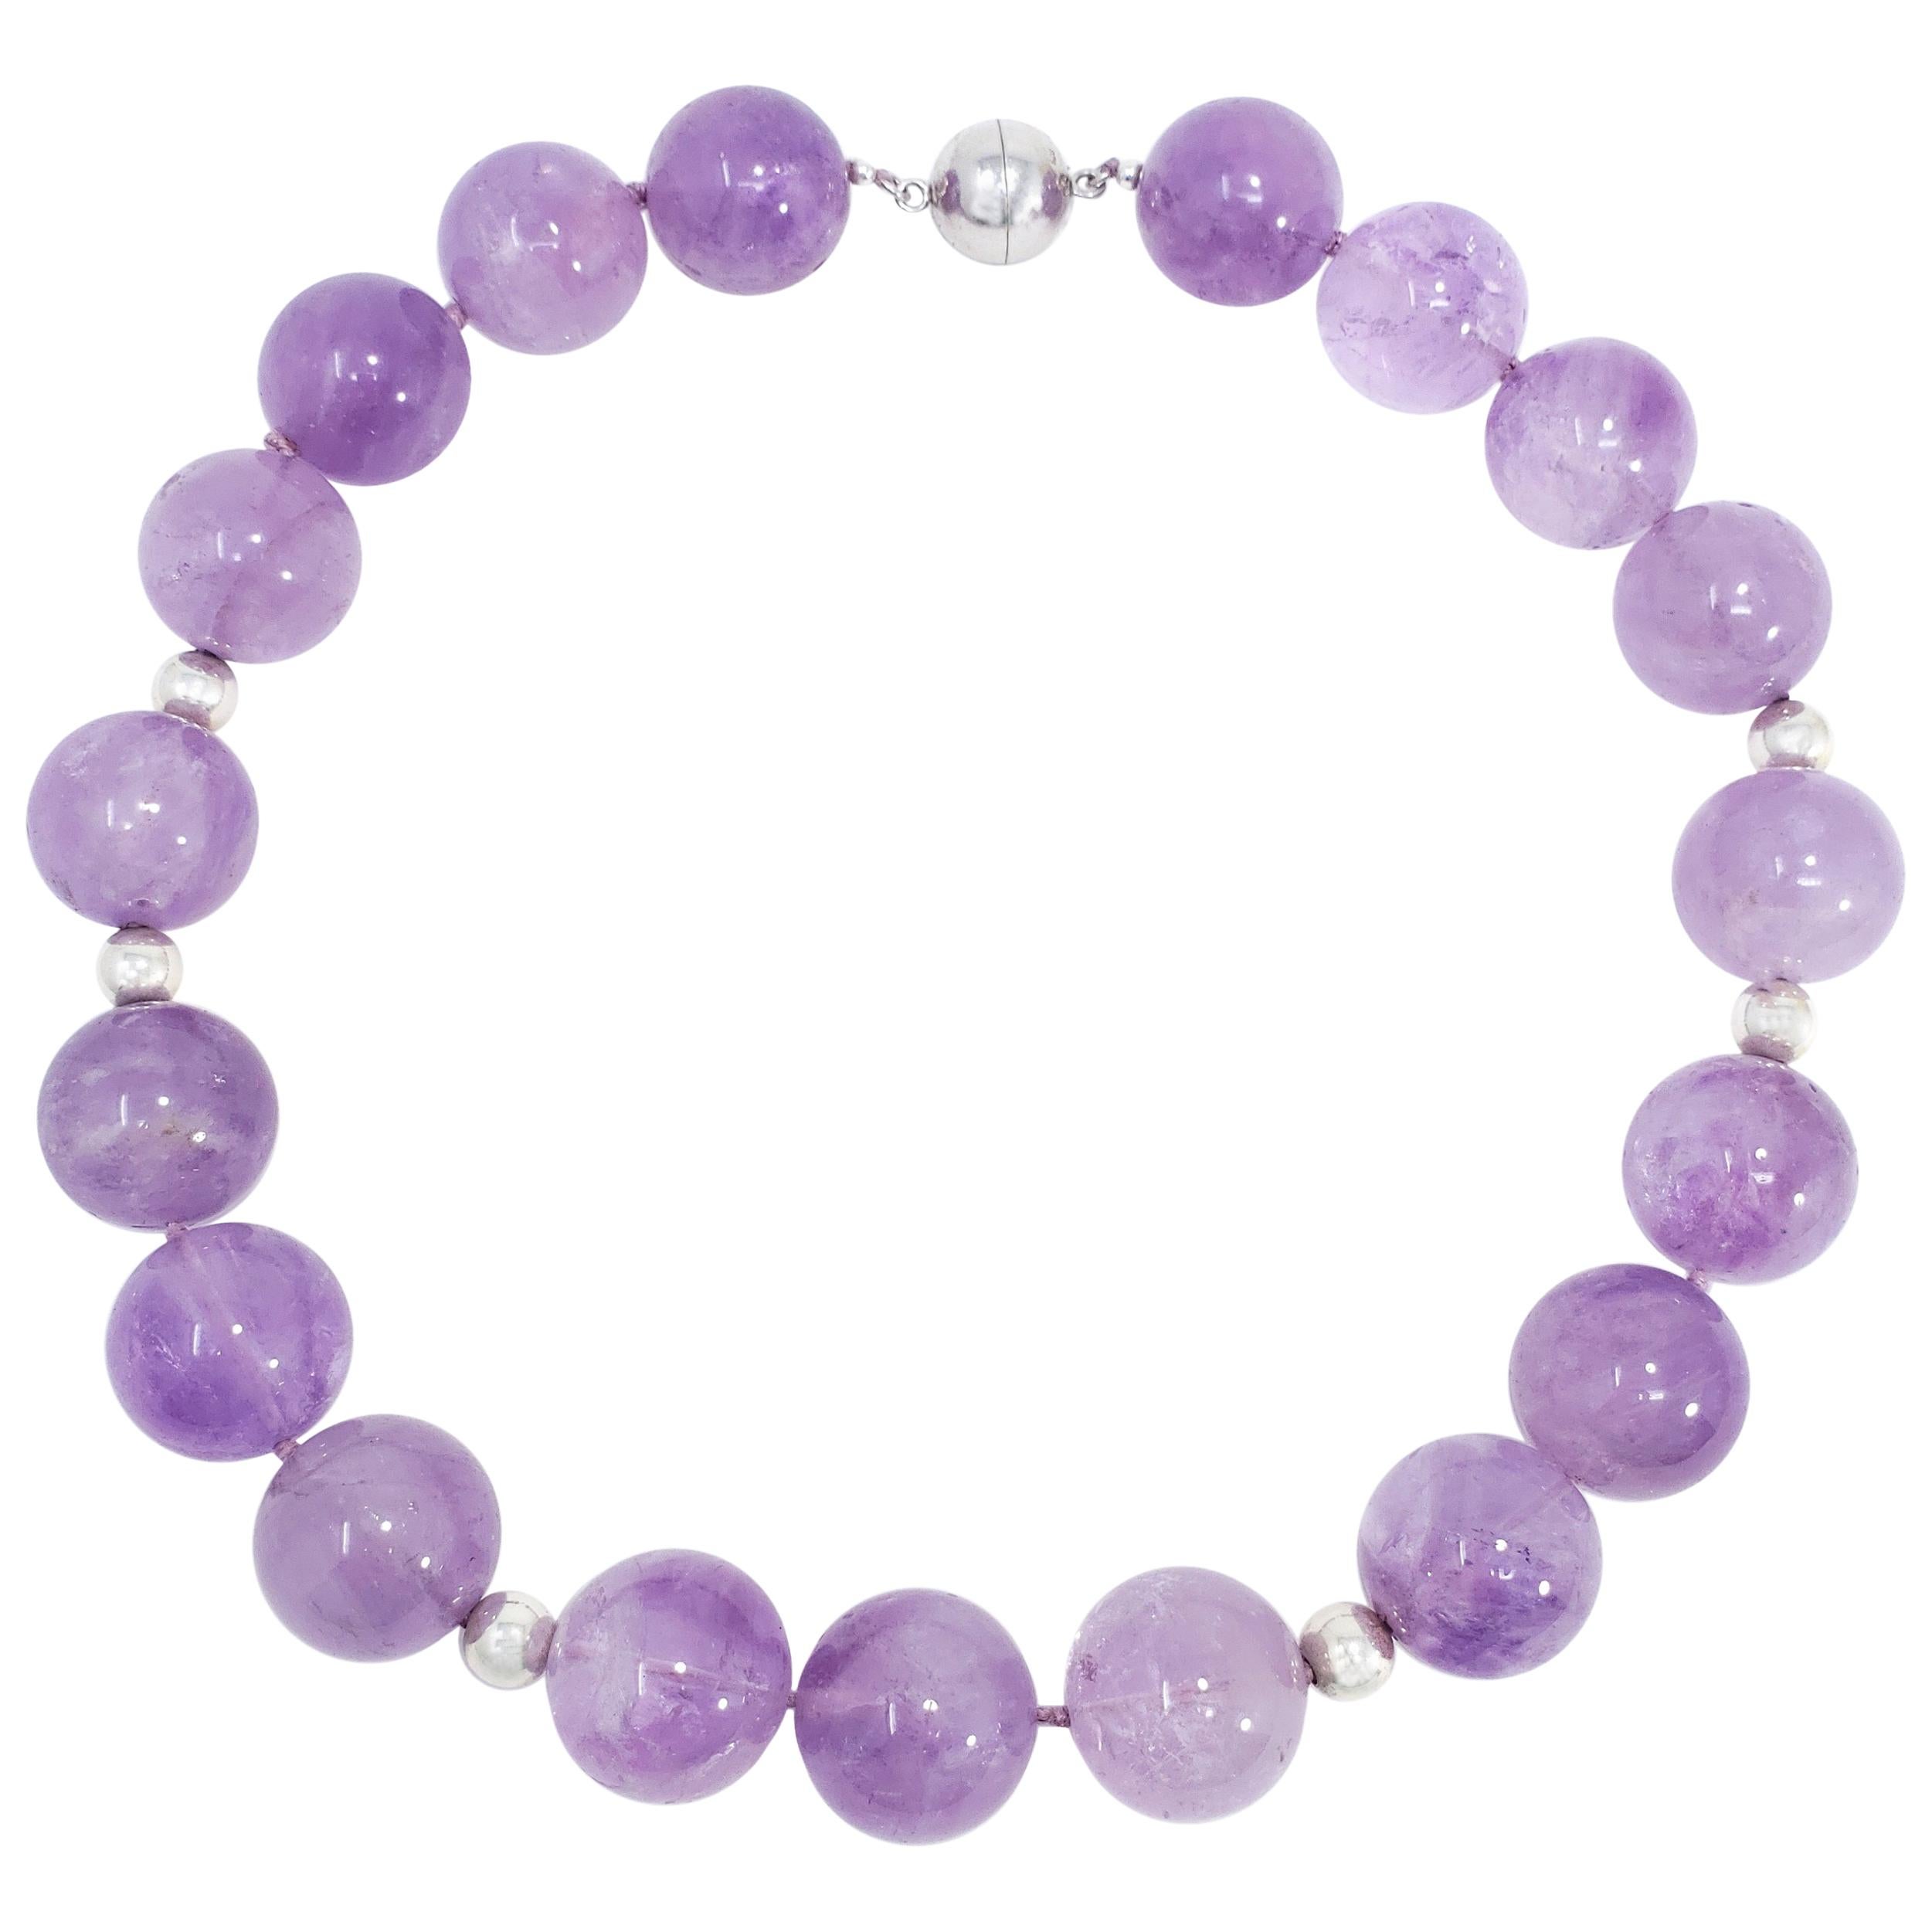 Large Genuine Amethyst 20mm Bead Necklace with Sterling Silver Beads, 18.5"